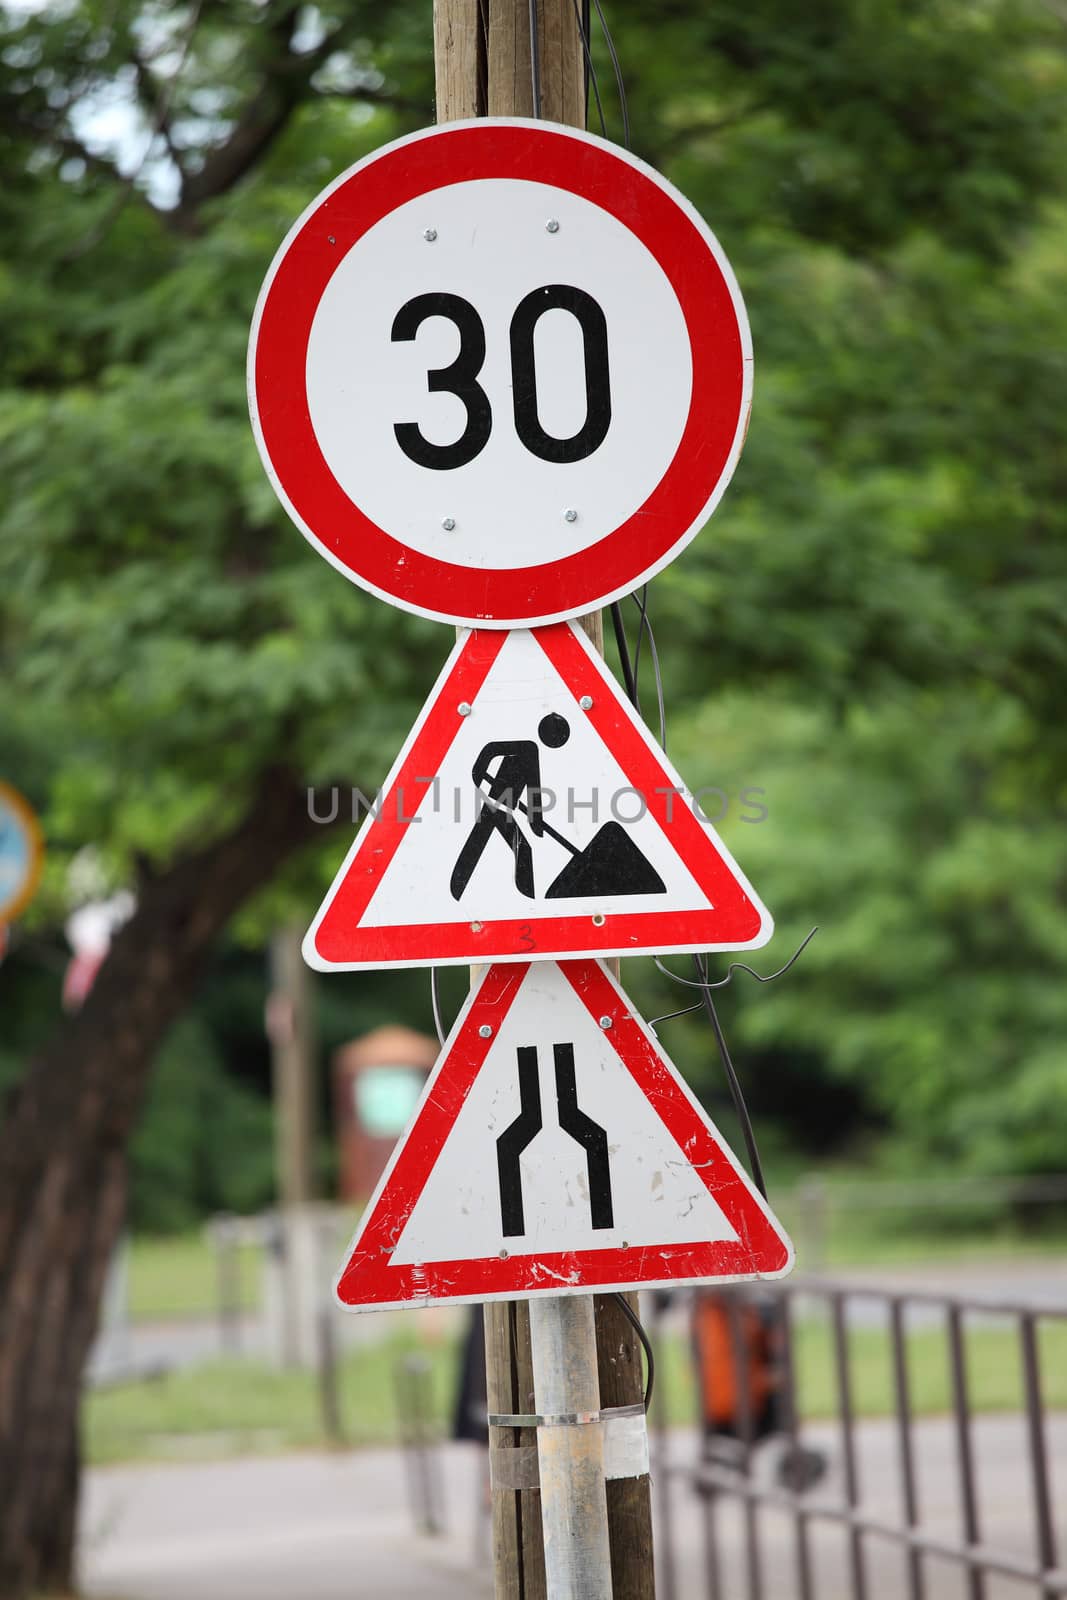 Traffic signs at a road construction site